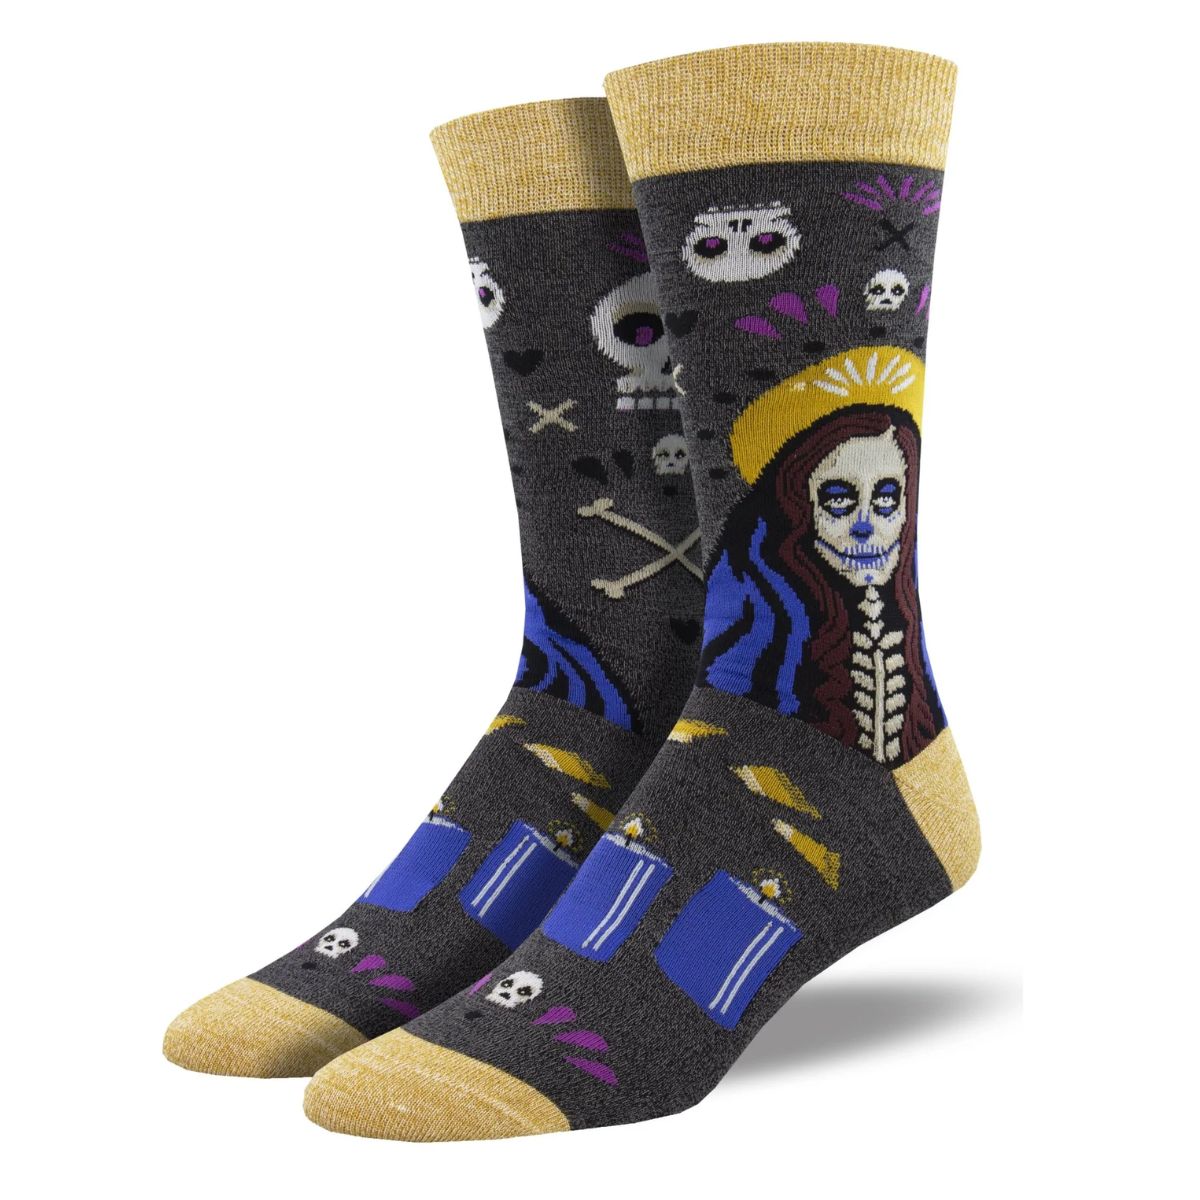 Wicked voodoo socks a pair of charcoal grey socks with skeleton and candle print